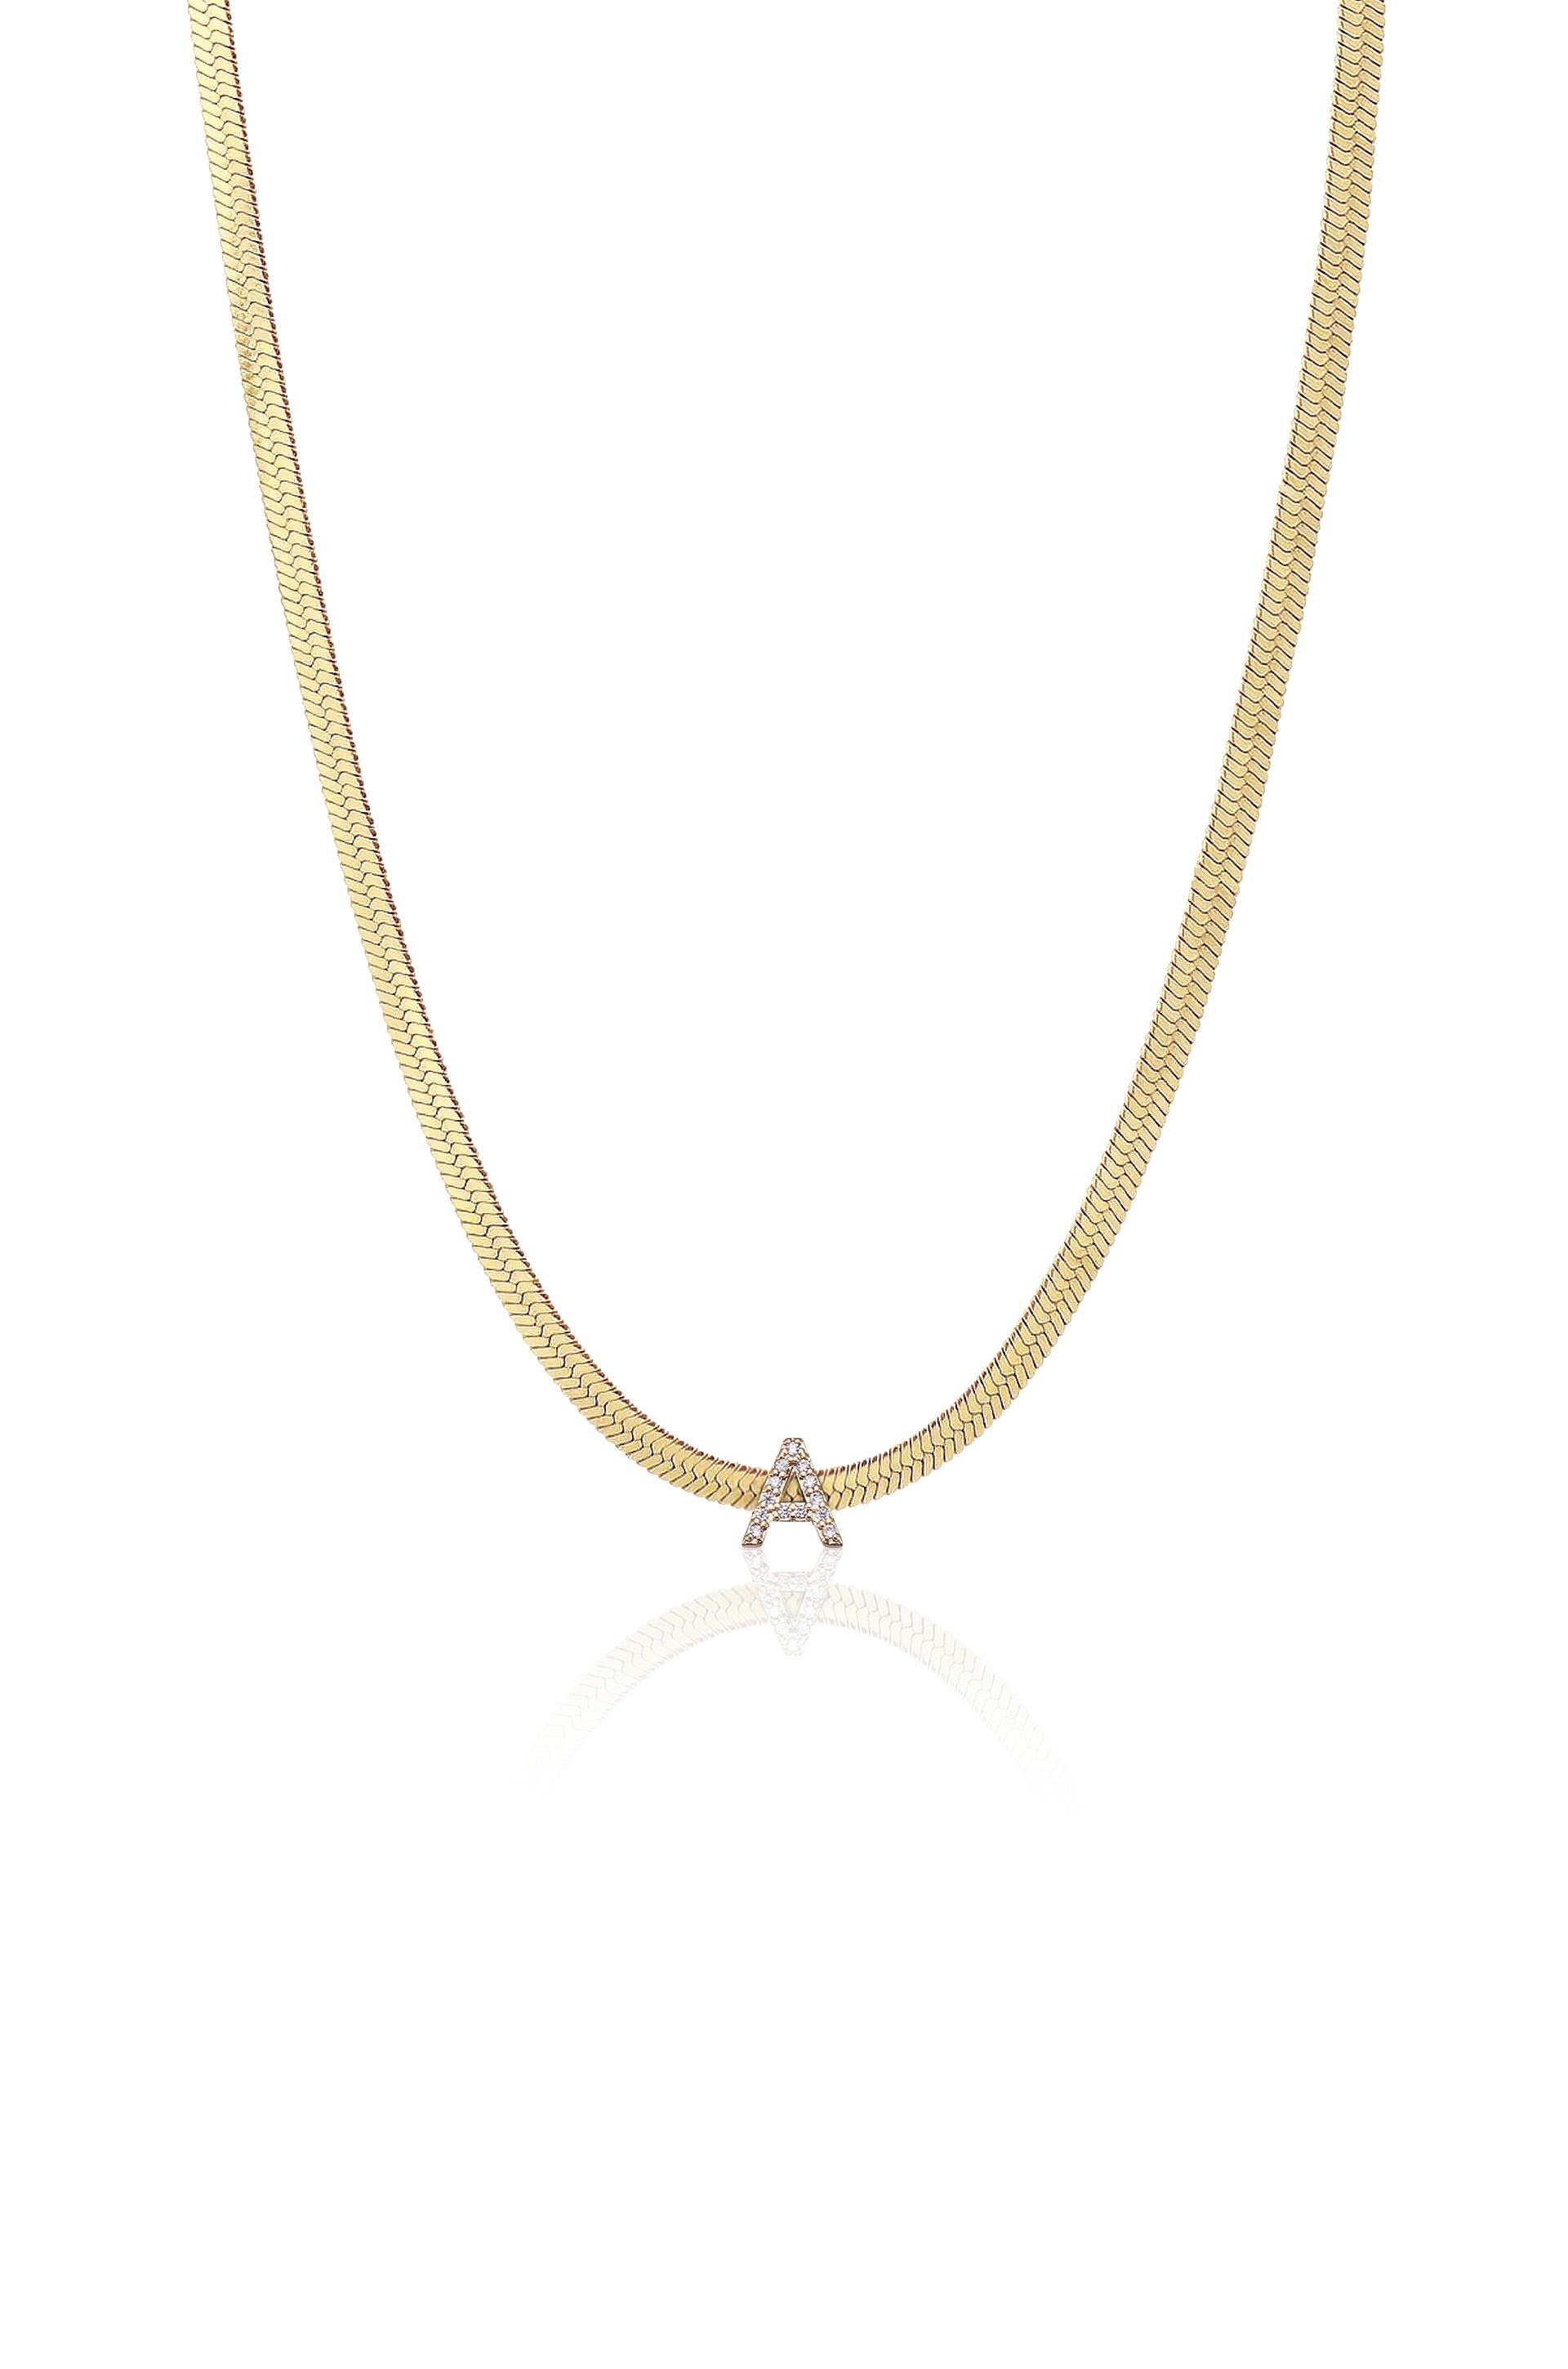 Initial Herringbone 18k Gold Plated Necklace - A